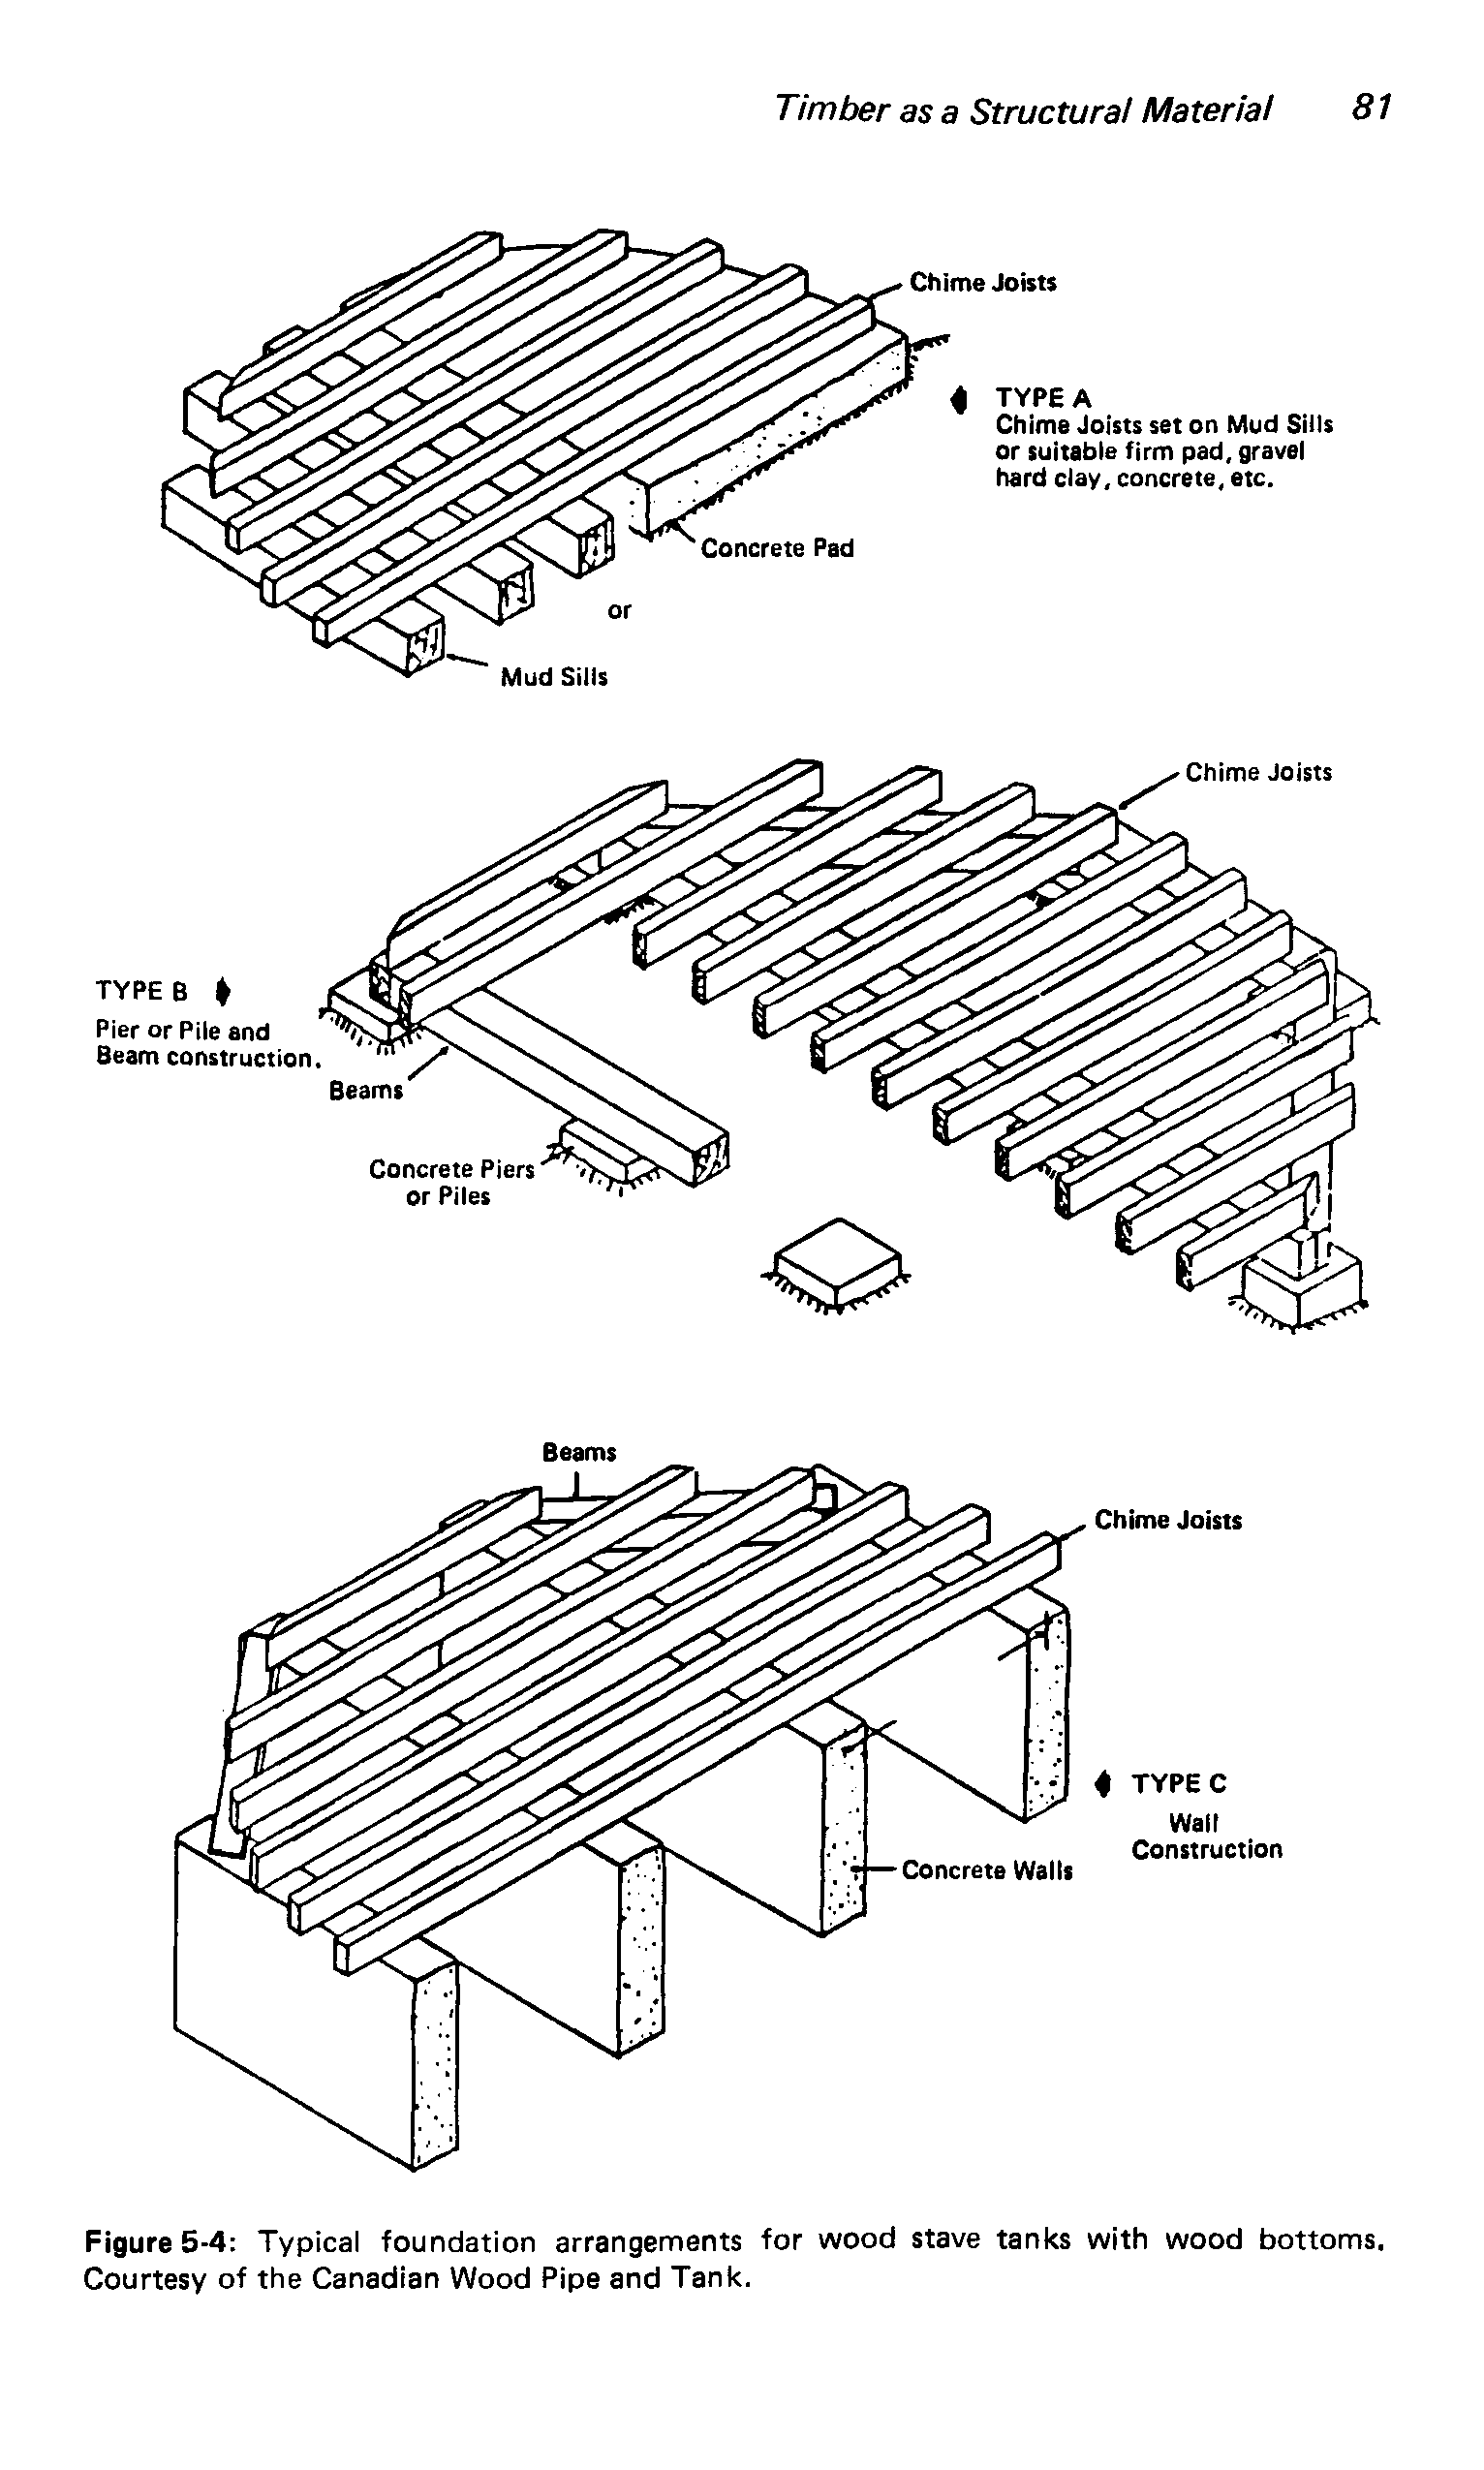 Figure 5-4 Typical foundation arrangements for wood stave tanks with wood bottoms. Courtesy of the Canadian Wood Pipe and Tank.